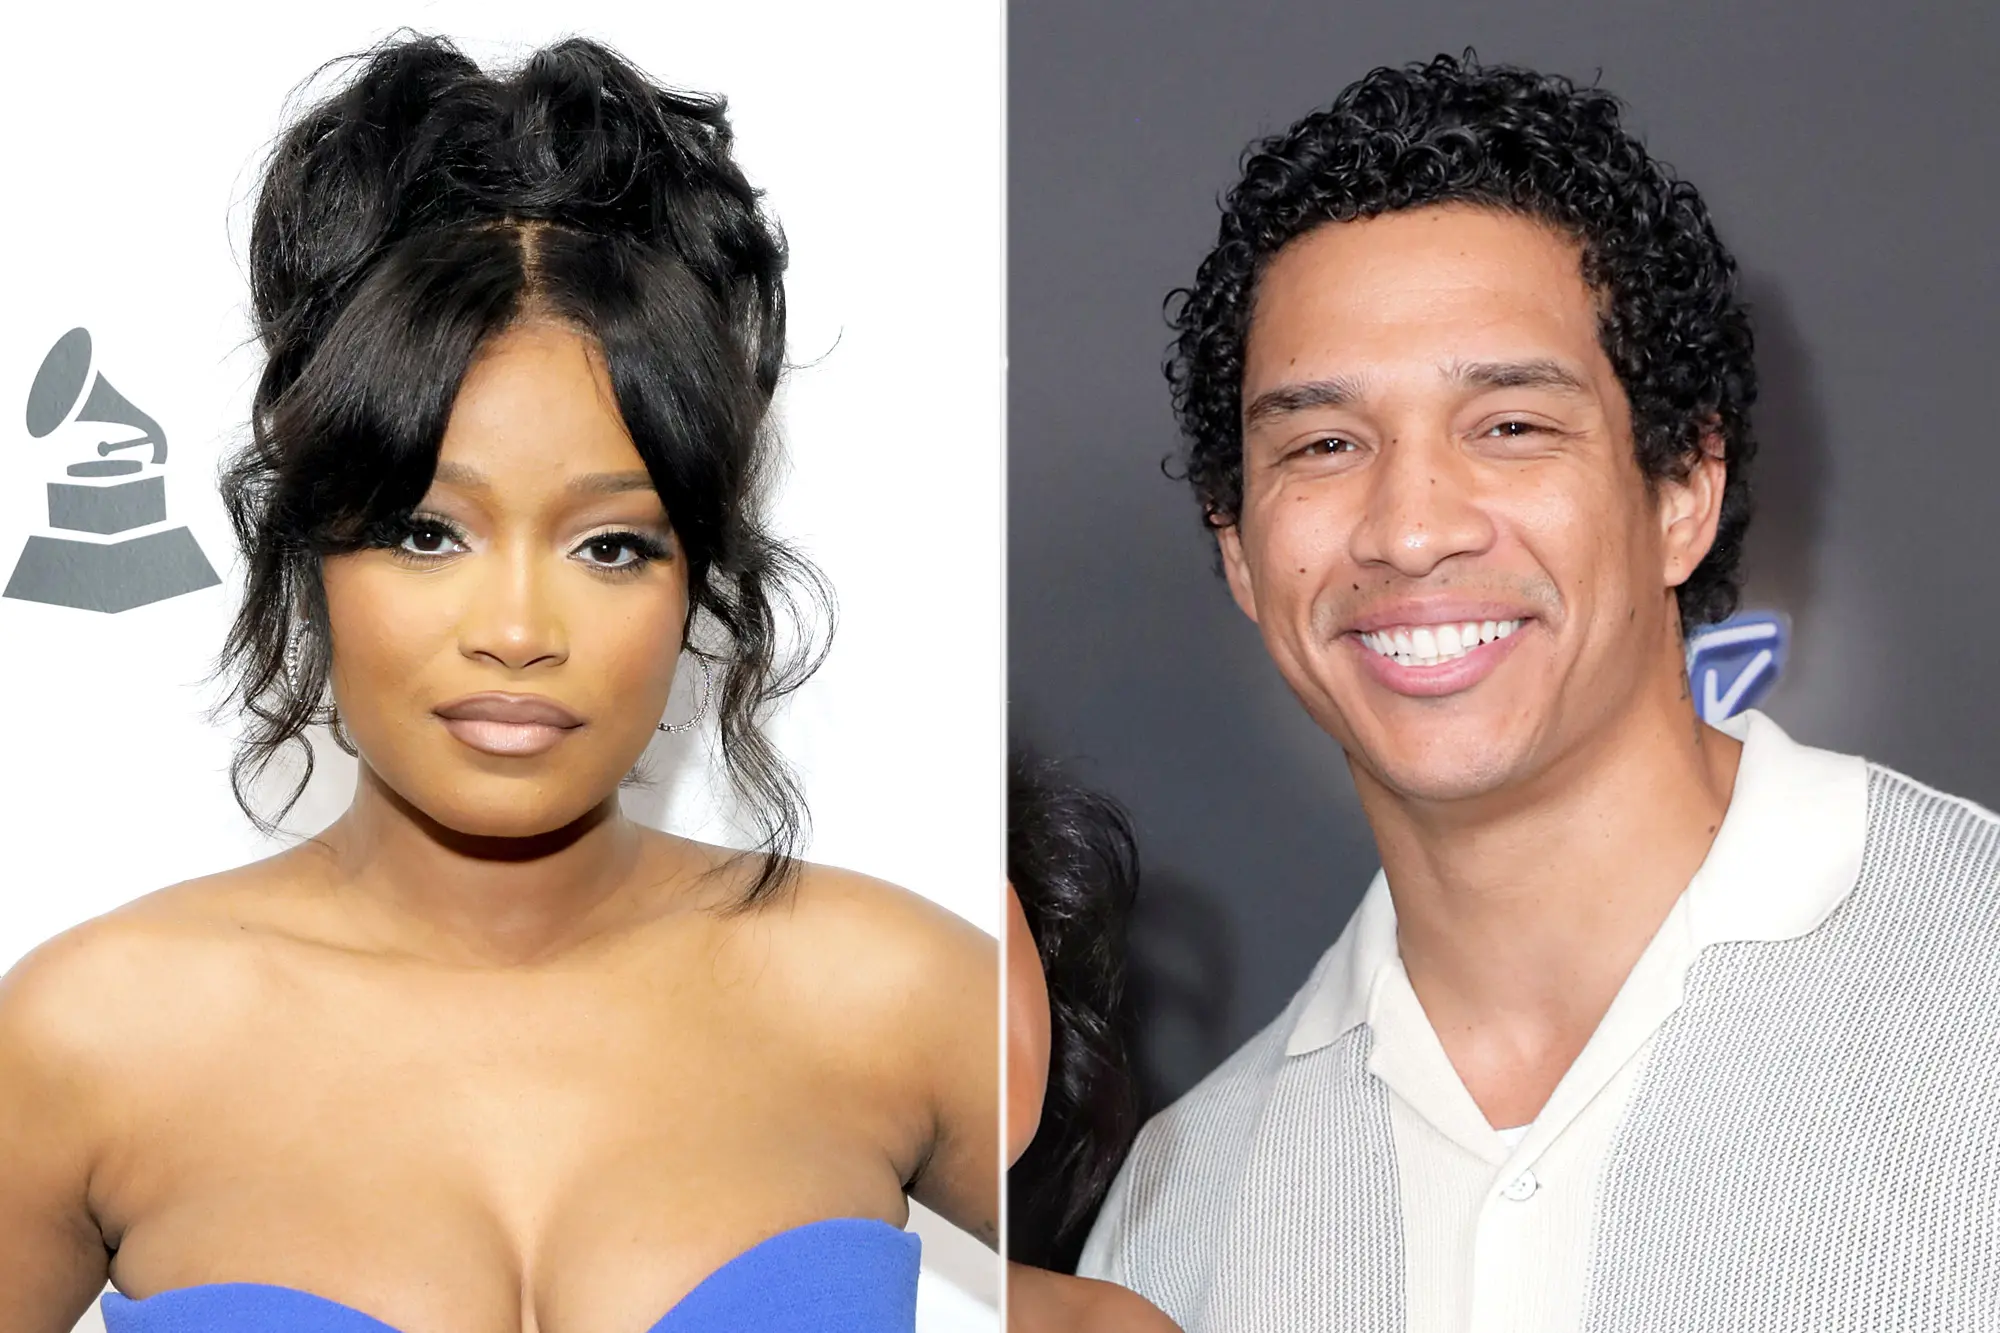 Keke Palmer’s ex Darius Jackson ‘repents’ as he gets baptized following abuse allegations